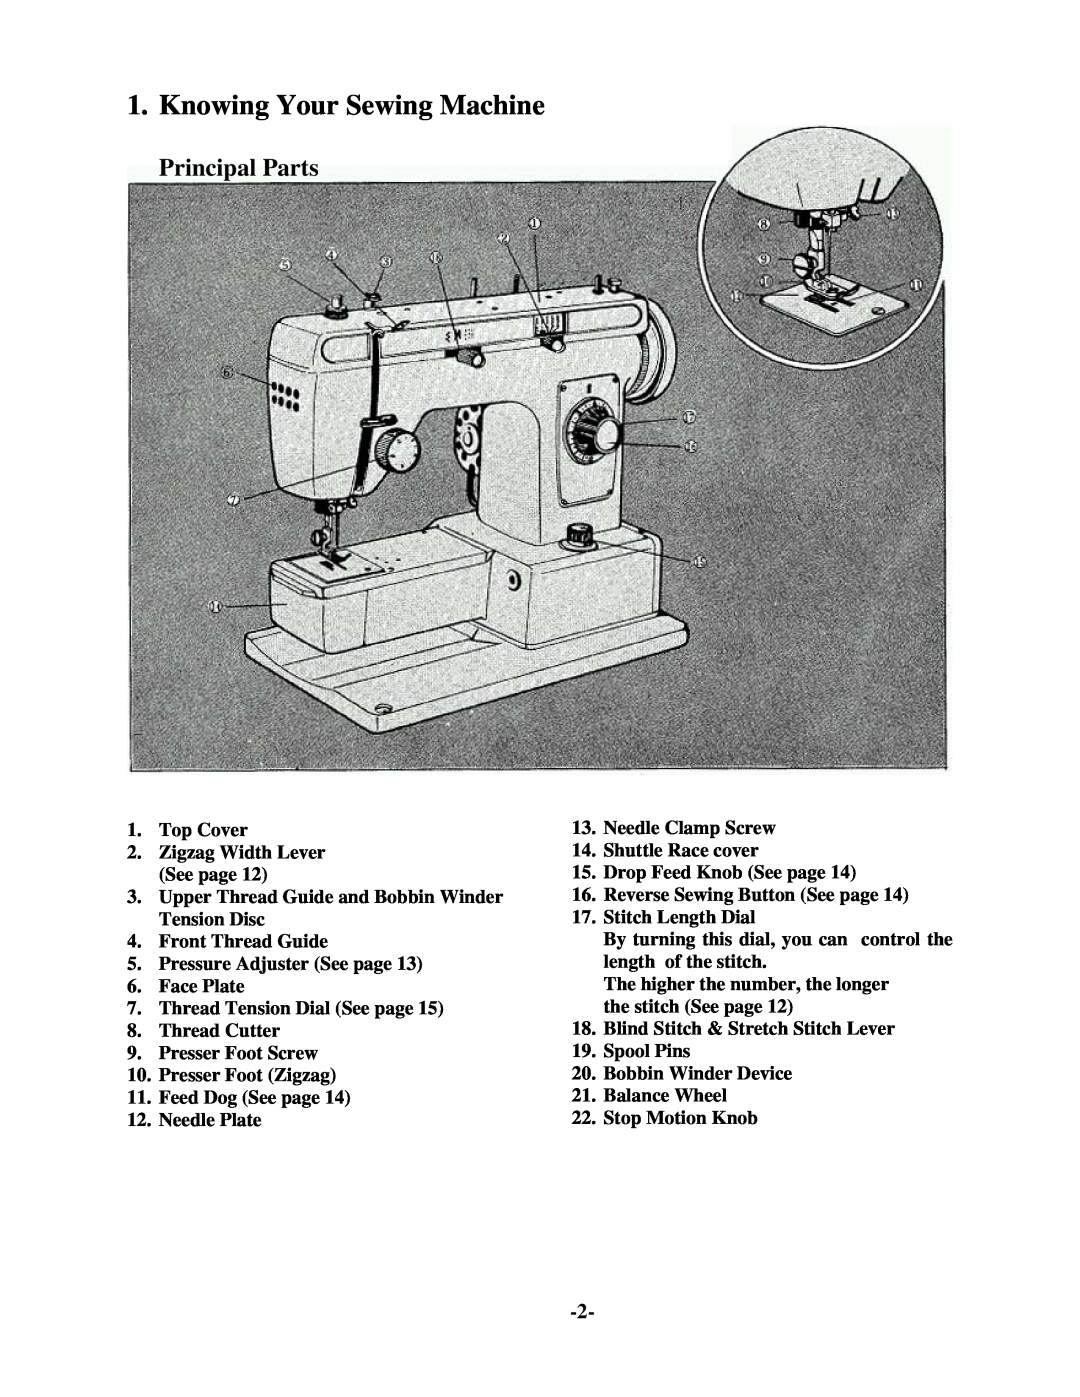 Brother 681B-UG Knowing Your Sewing Machine, Top Cover 2. Zigzag Width Lever See page, Needle Plate, Stitch Length Dial 